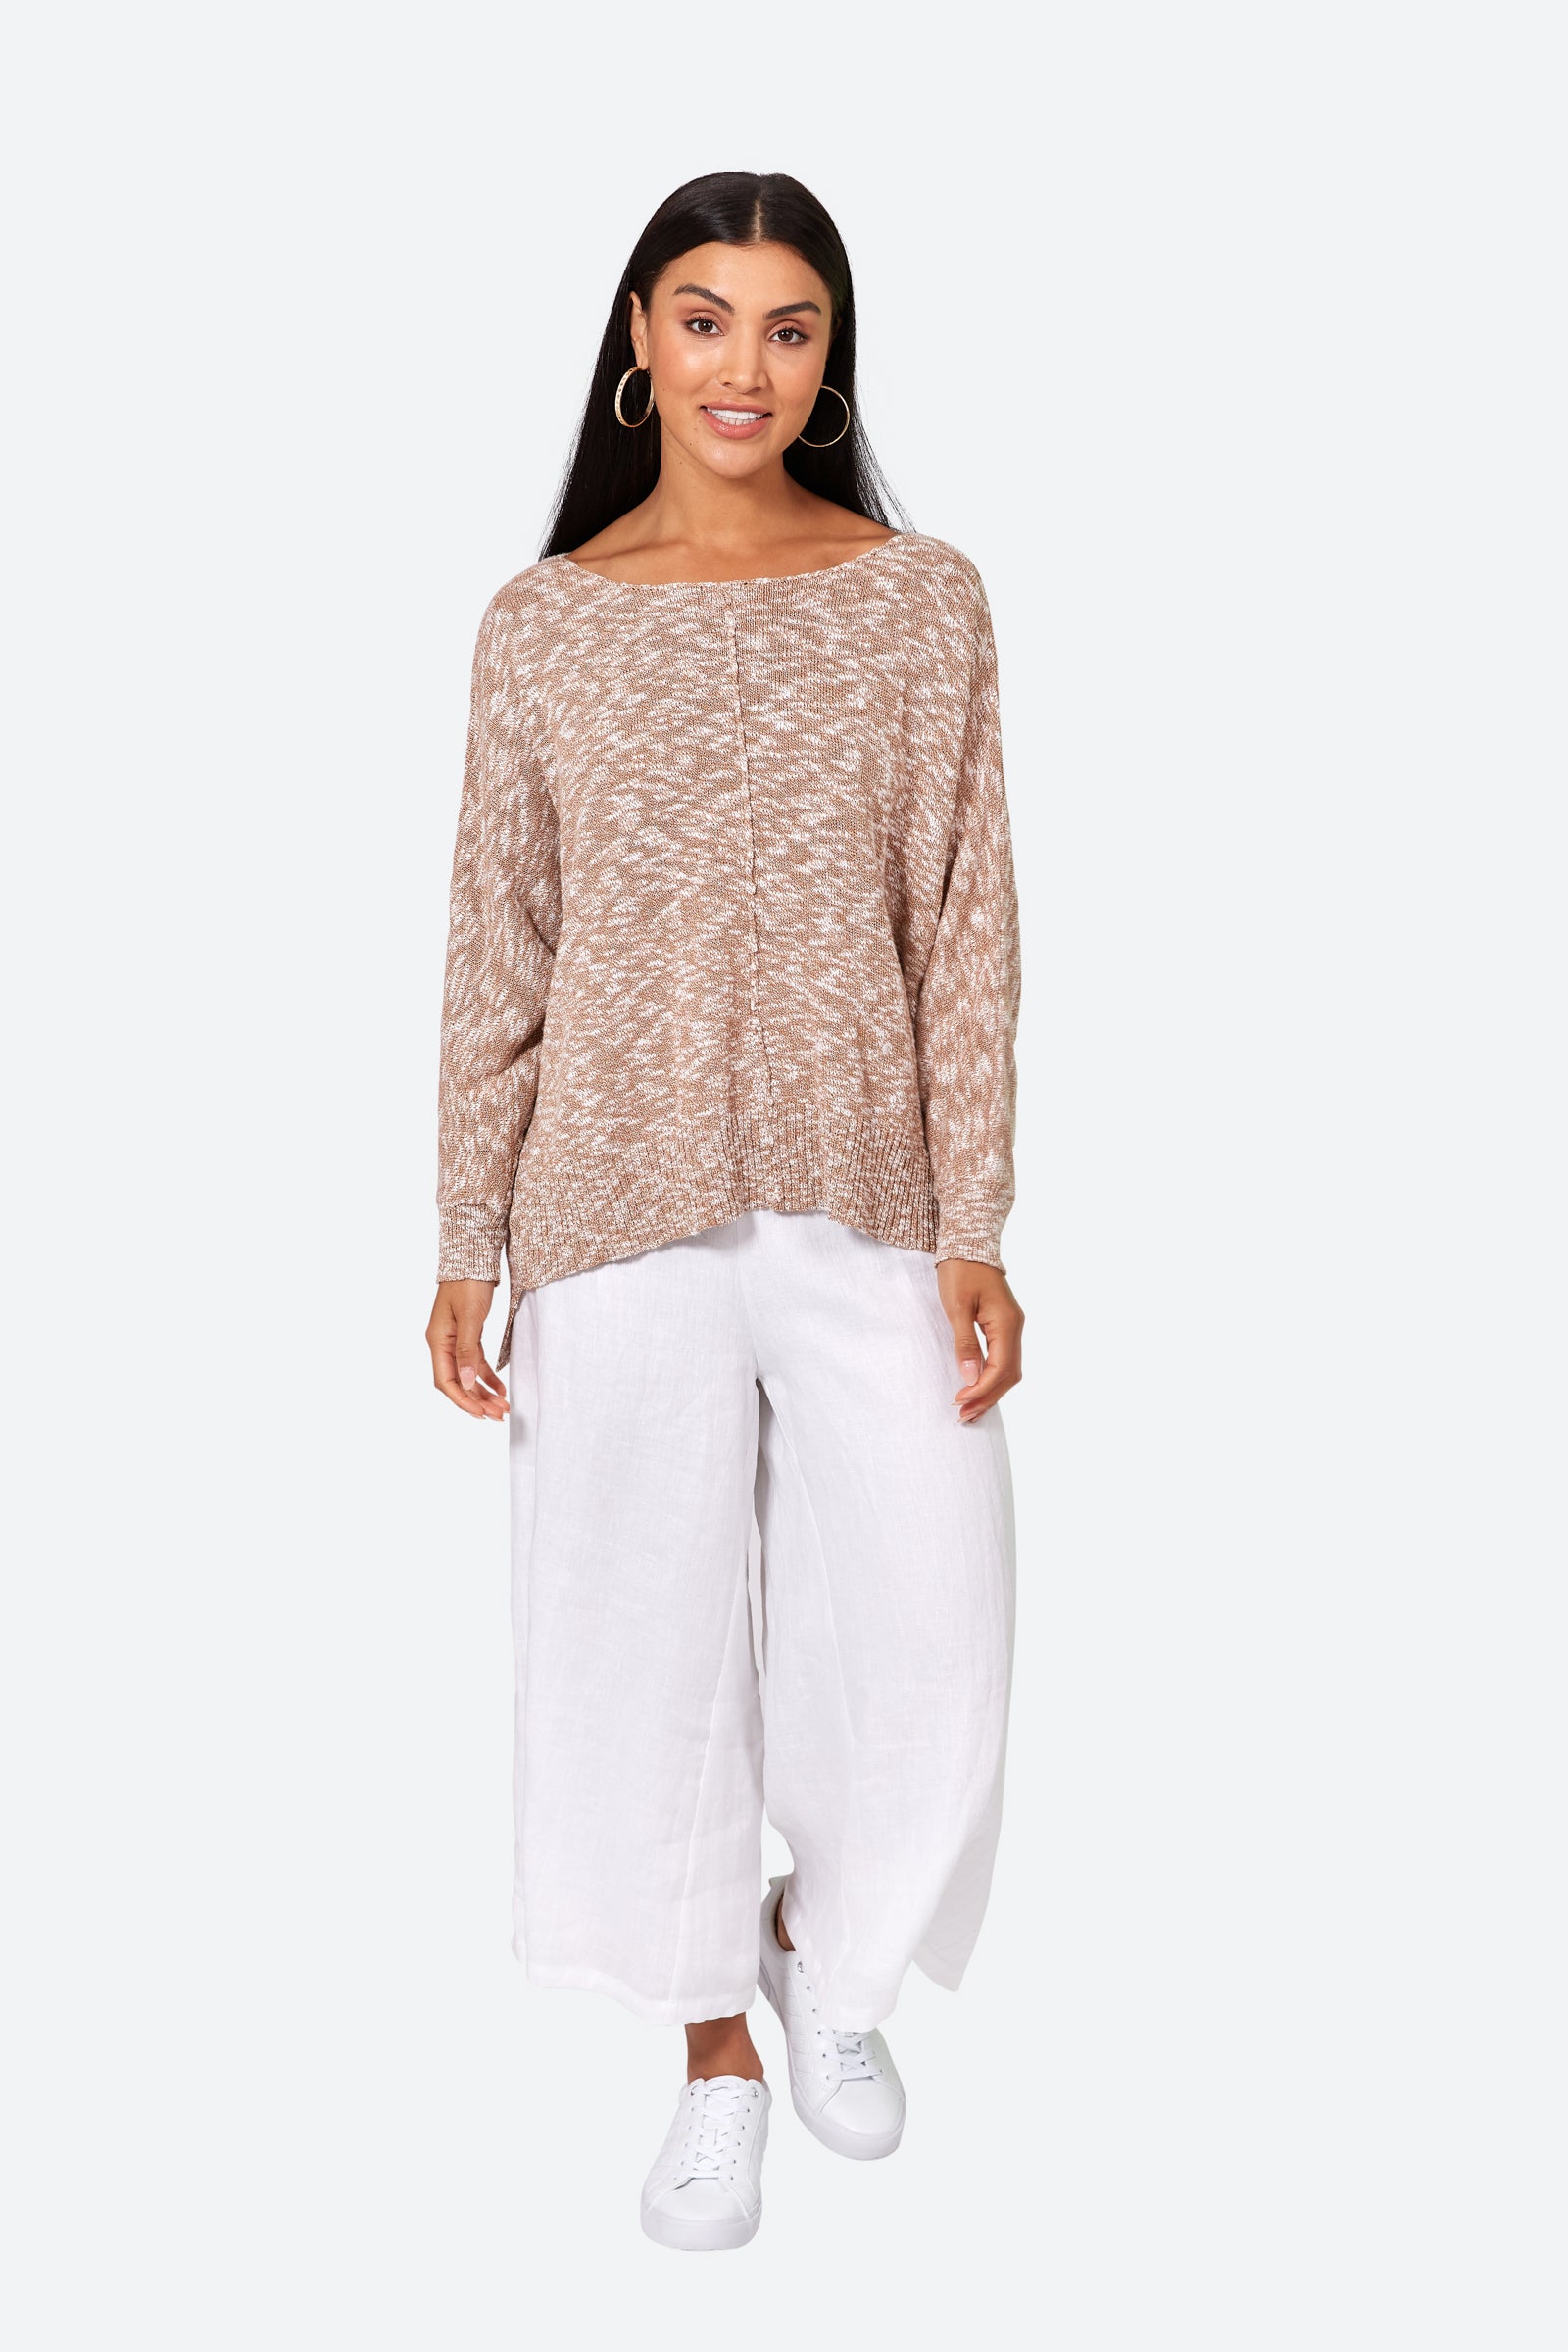 Jovial Jumper - Toffee - eb&ive Clothing - Knit Jumper